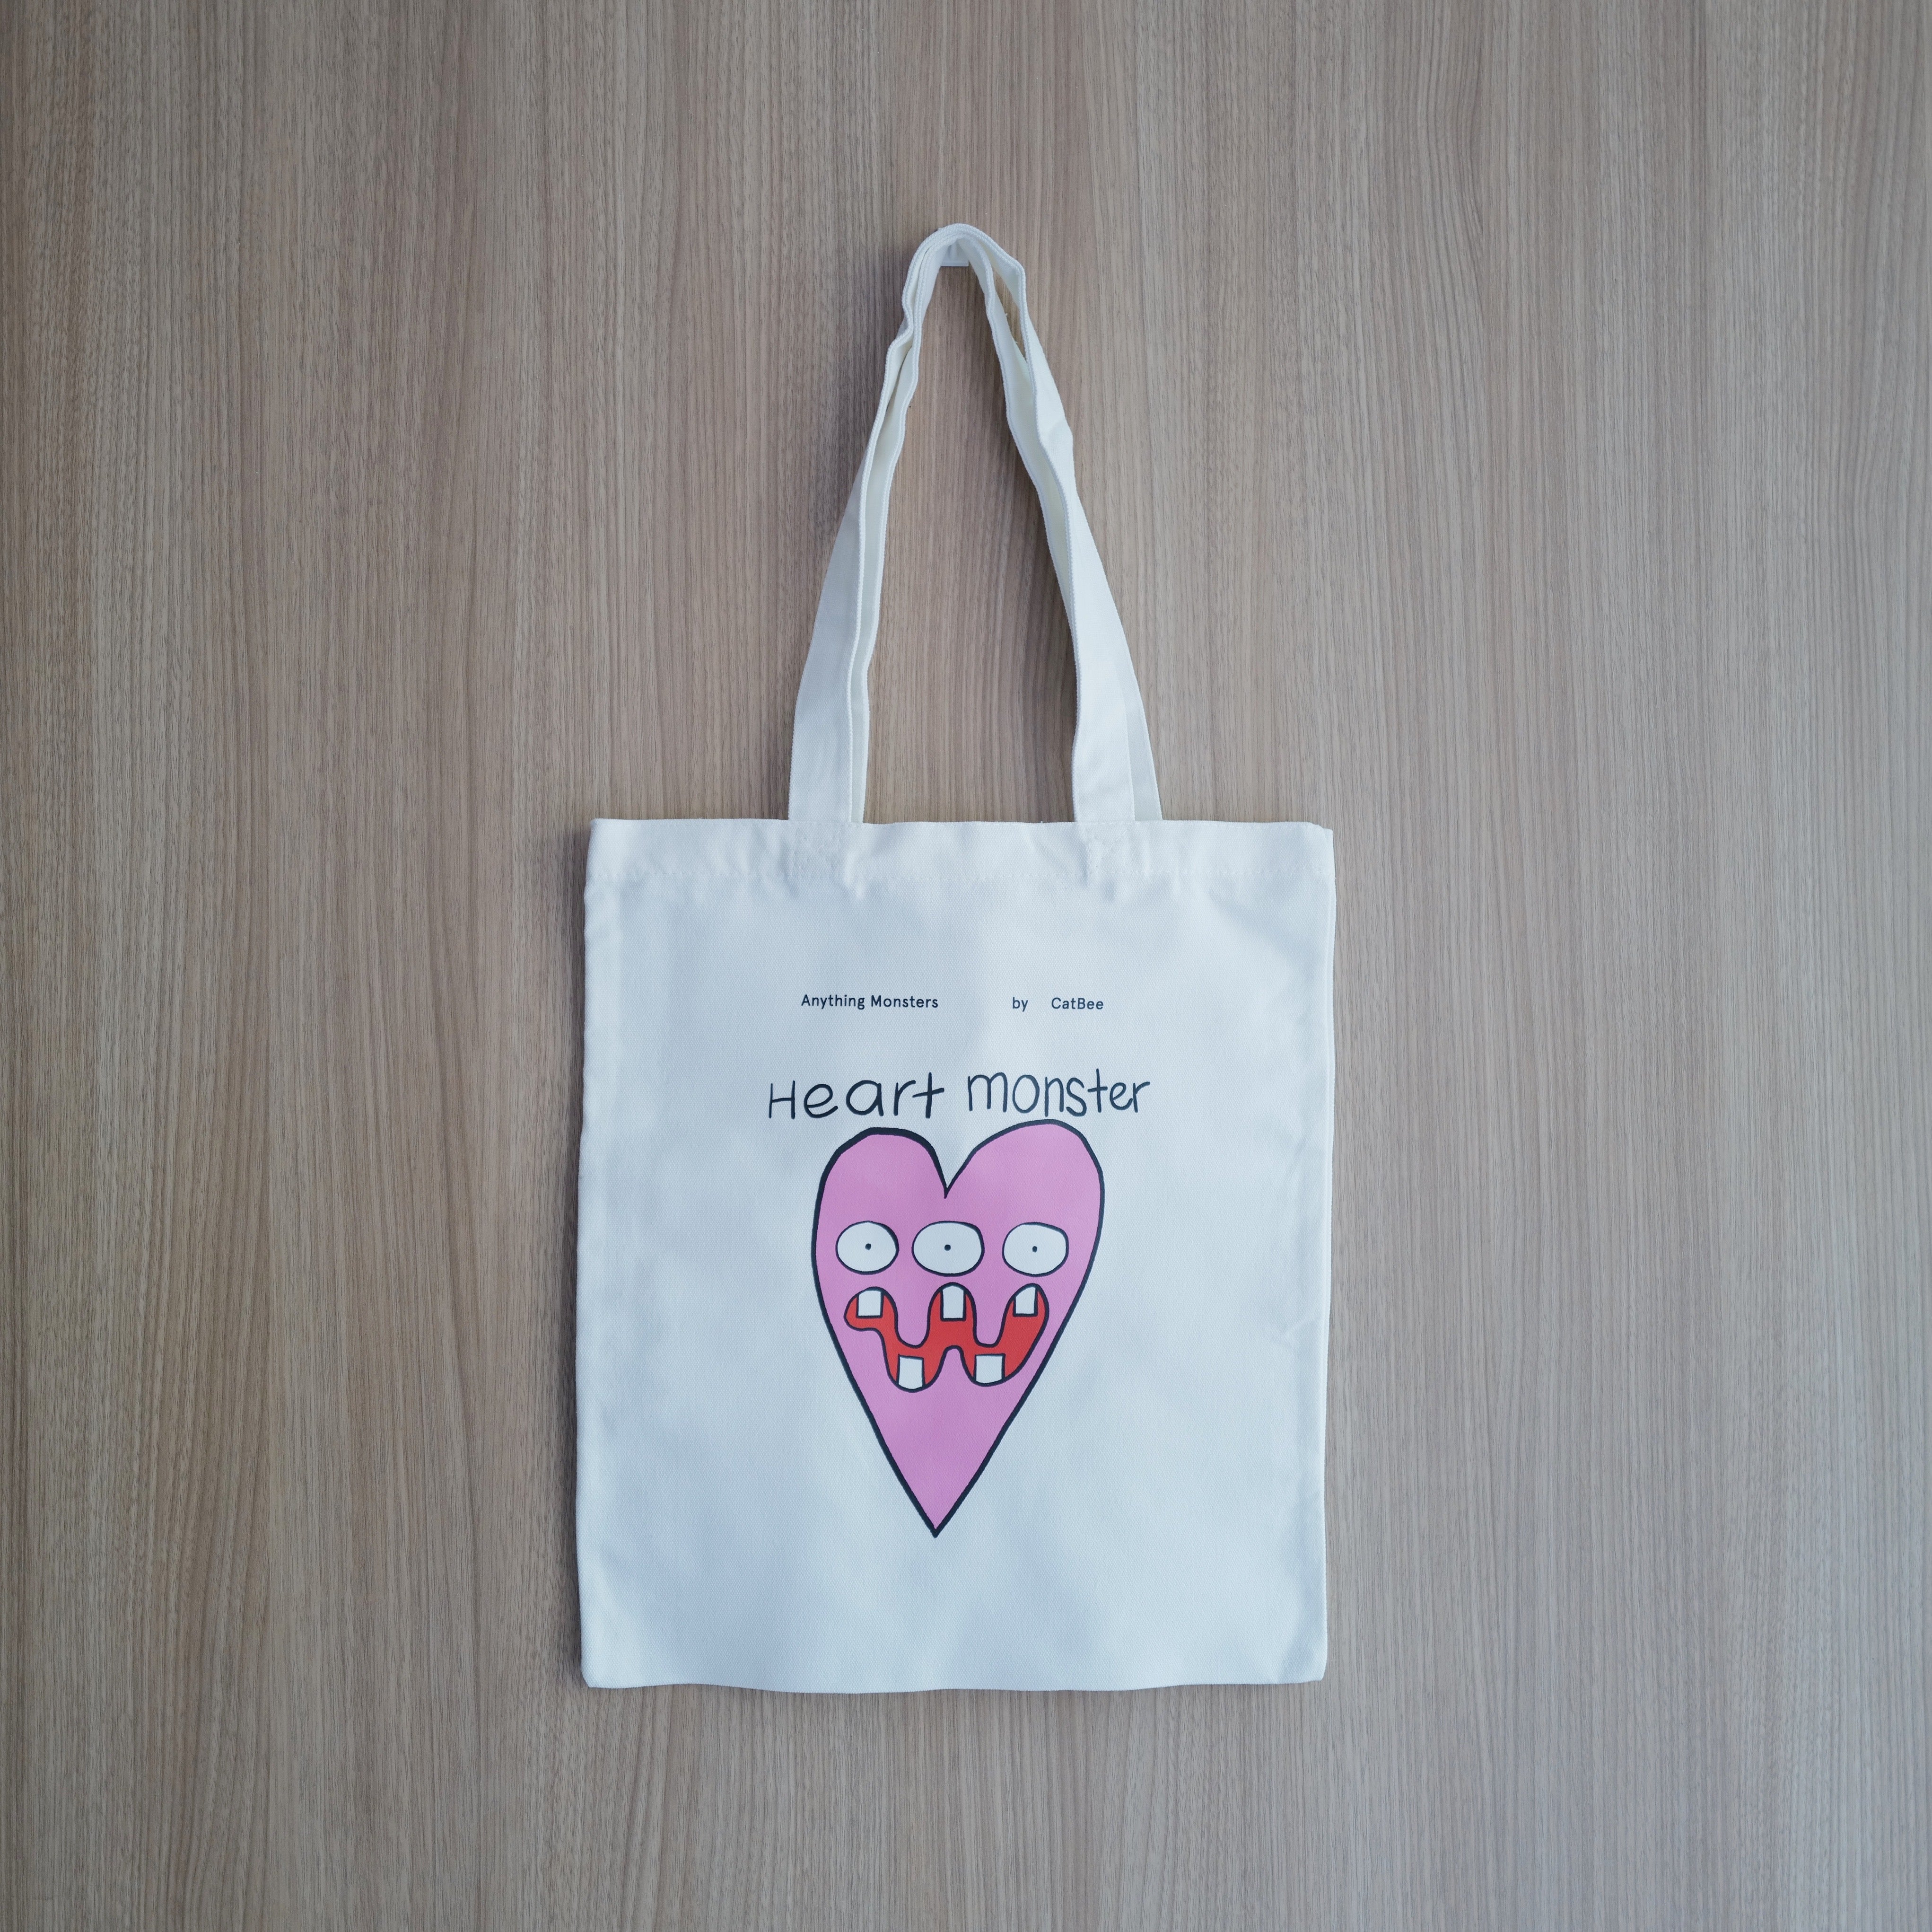 Creamier x CatBee: Express Your Style with Our "Anything Monsters" Tote Bag